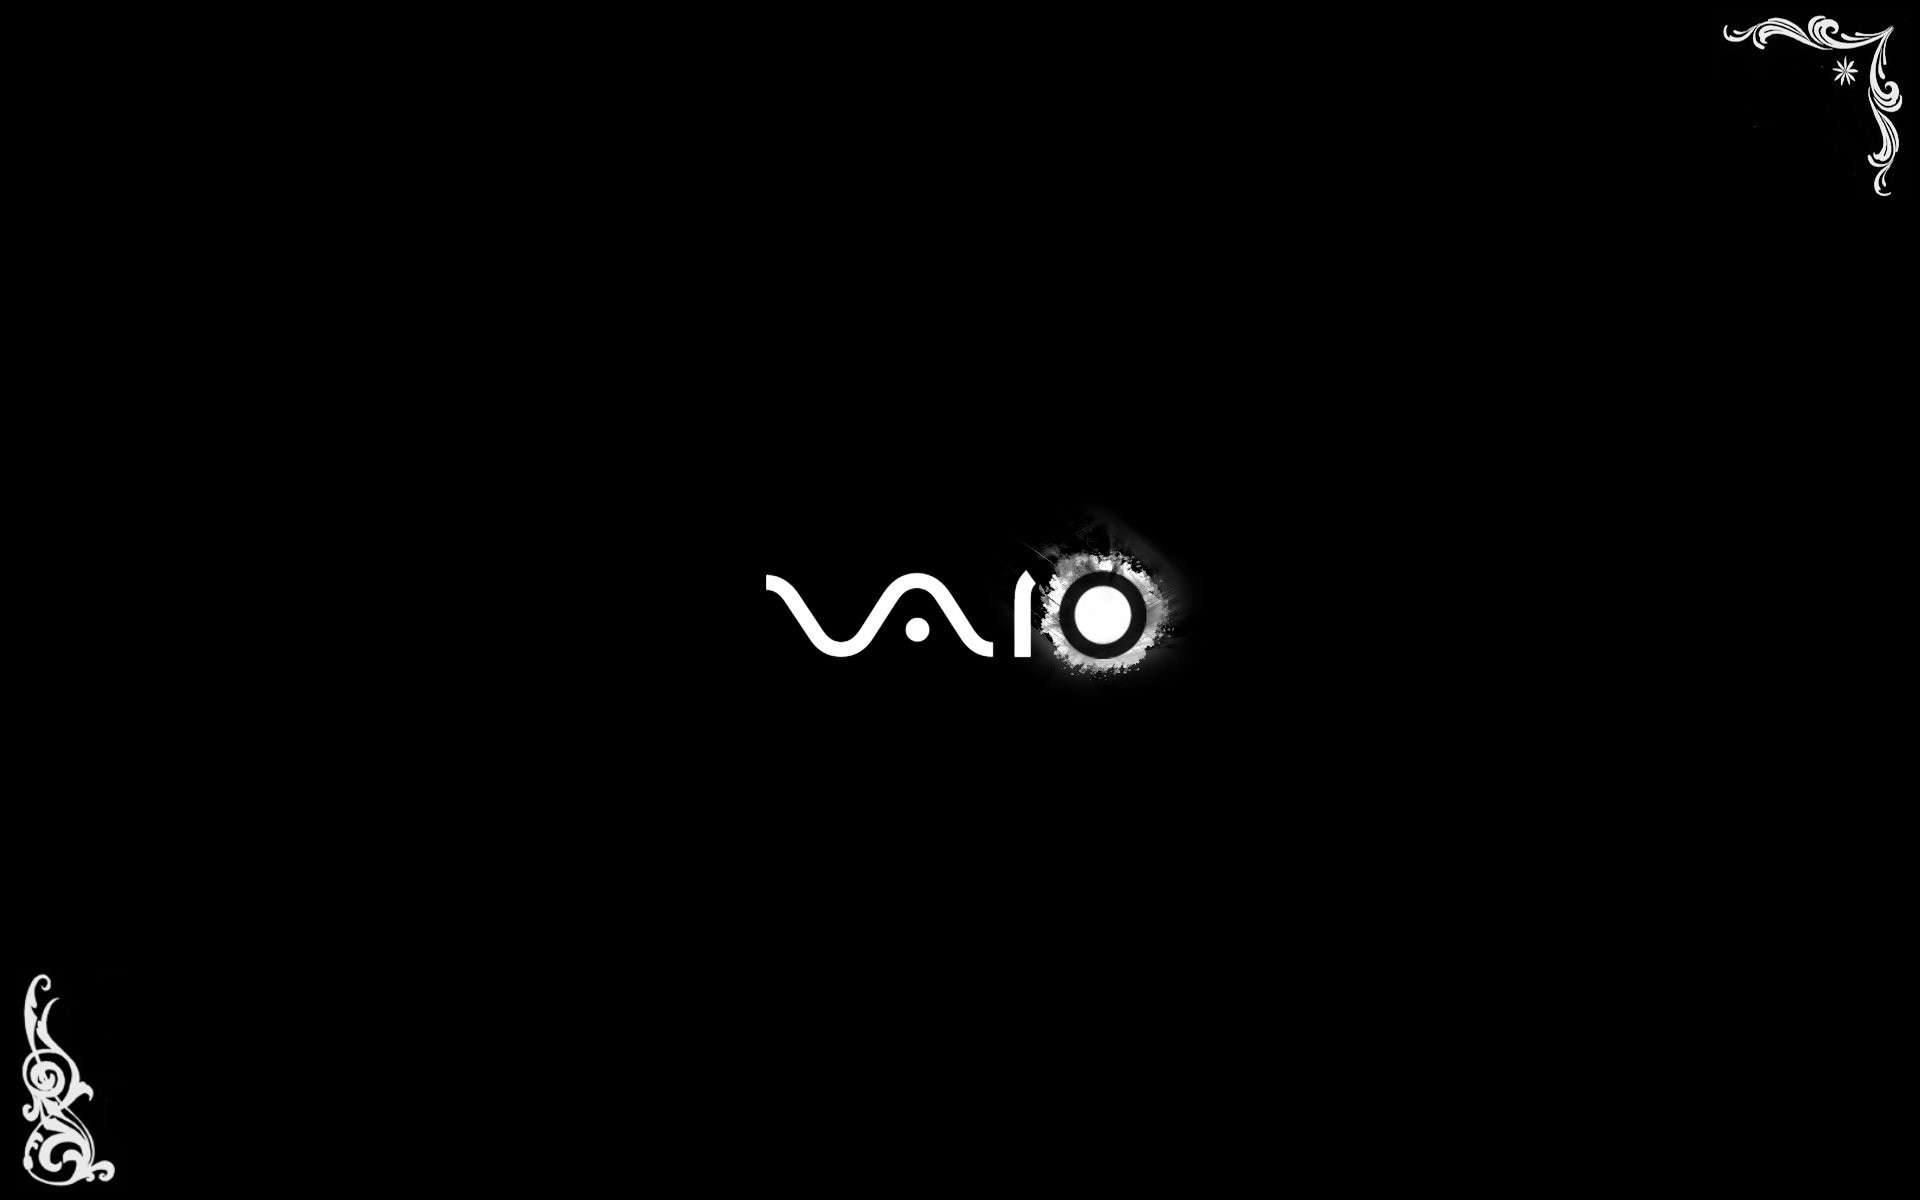 1920x1200 ... HD Sony Vaio Wallpapers & Vaio Backgrounds For Free Download ...